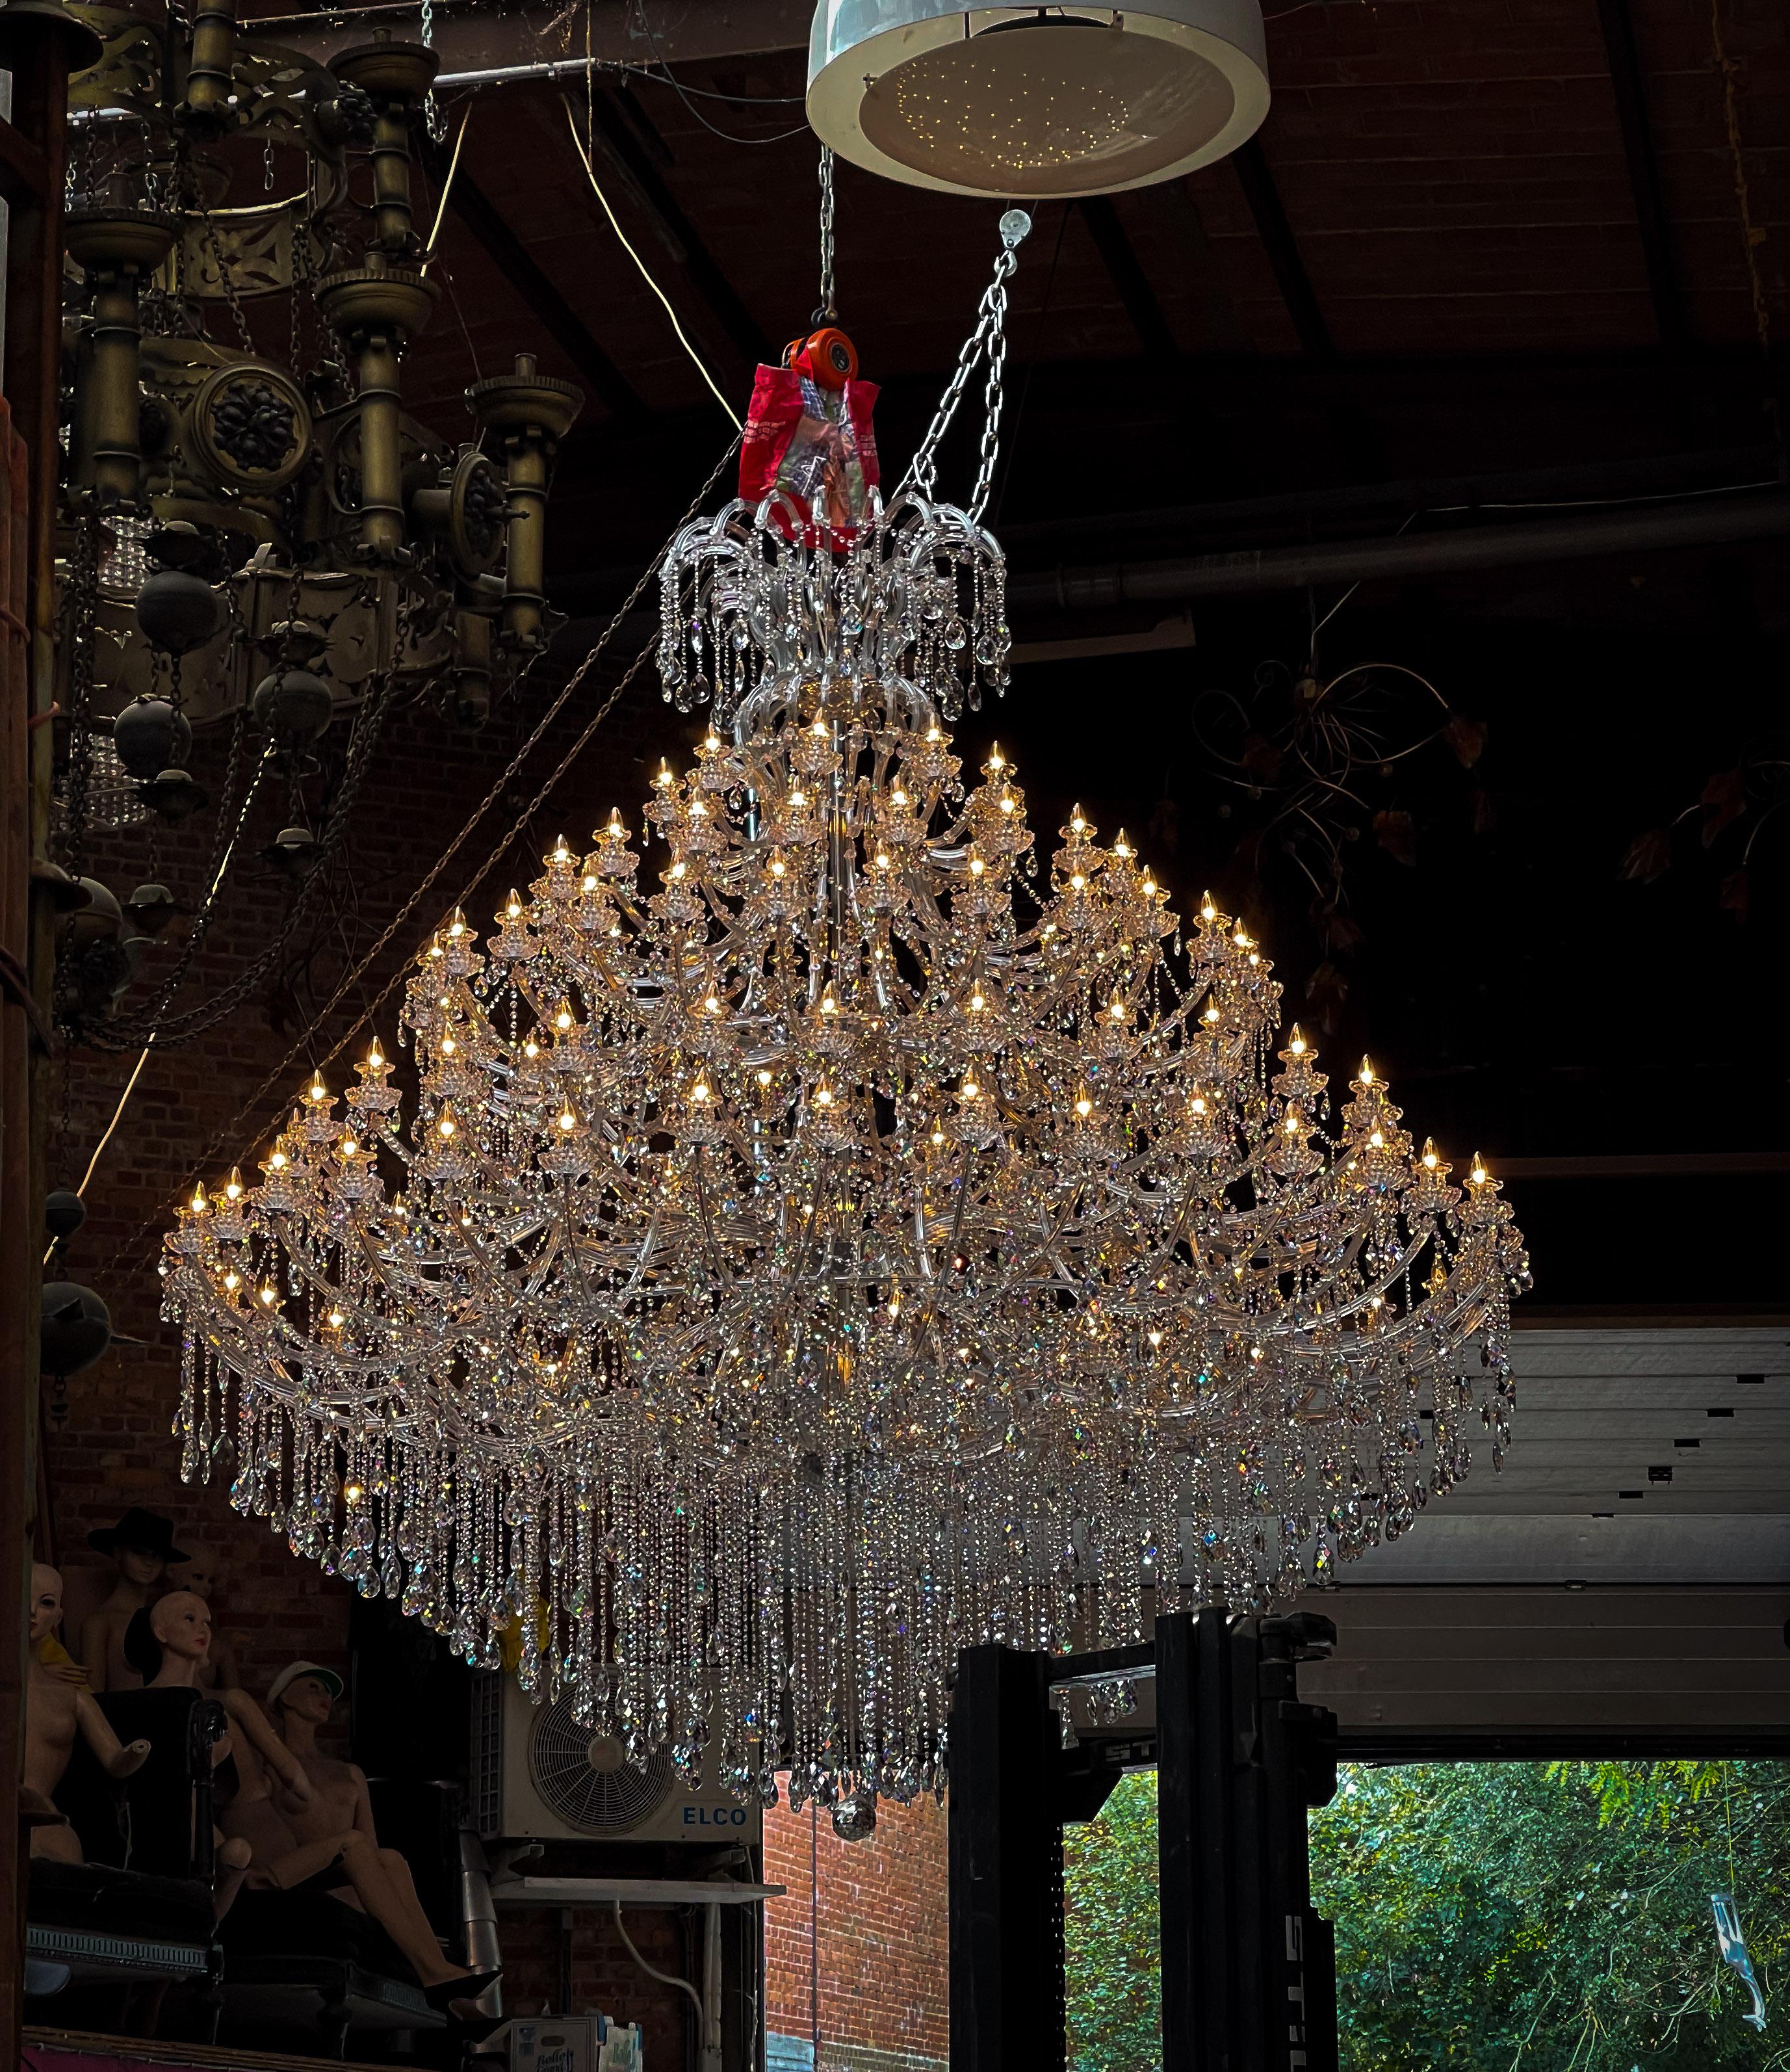 Presenting an extraordinary XXL Marie Therese chandelier, an awe-inspiring masterpiece spanning an impressive 3 by 3 meters. The sheer size of this piece sets it apart, making it an absolute showstopper for any space. Whether gracing a commercial